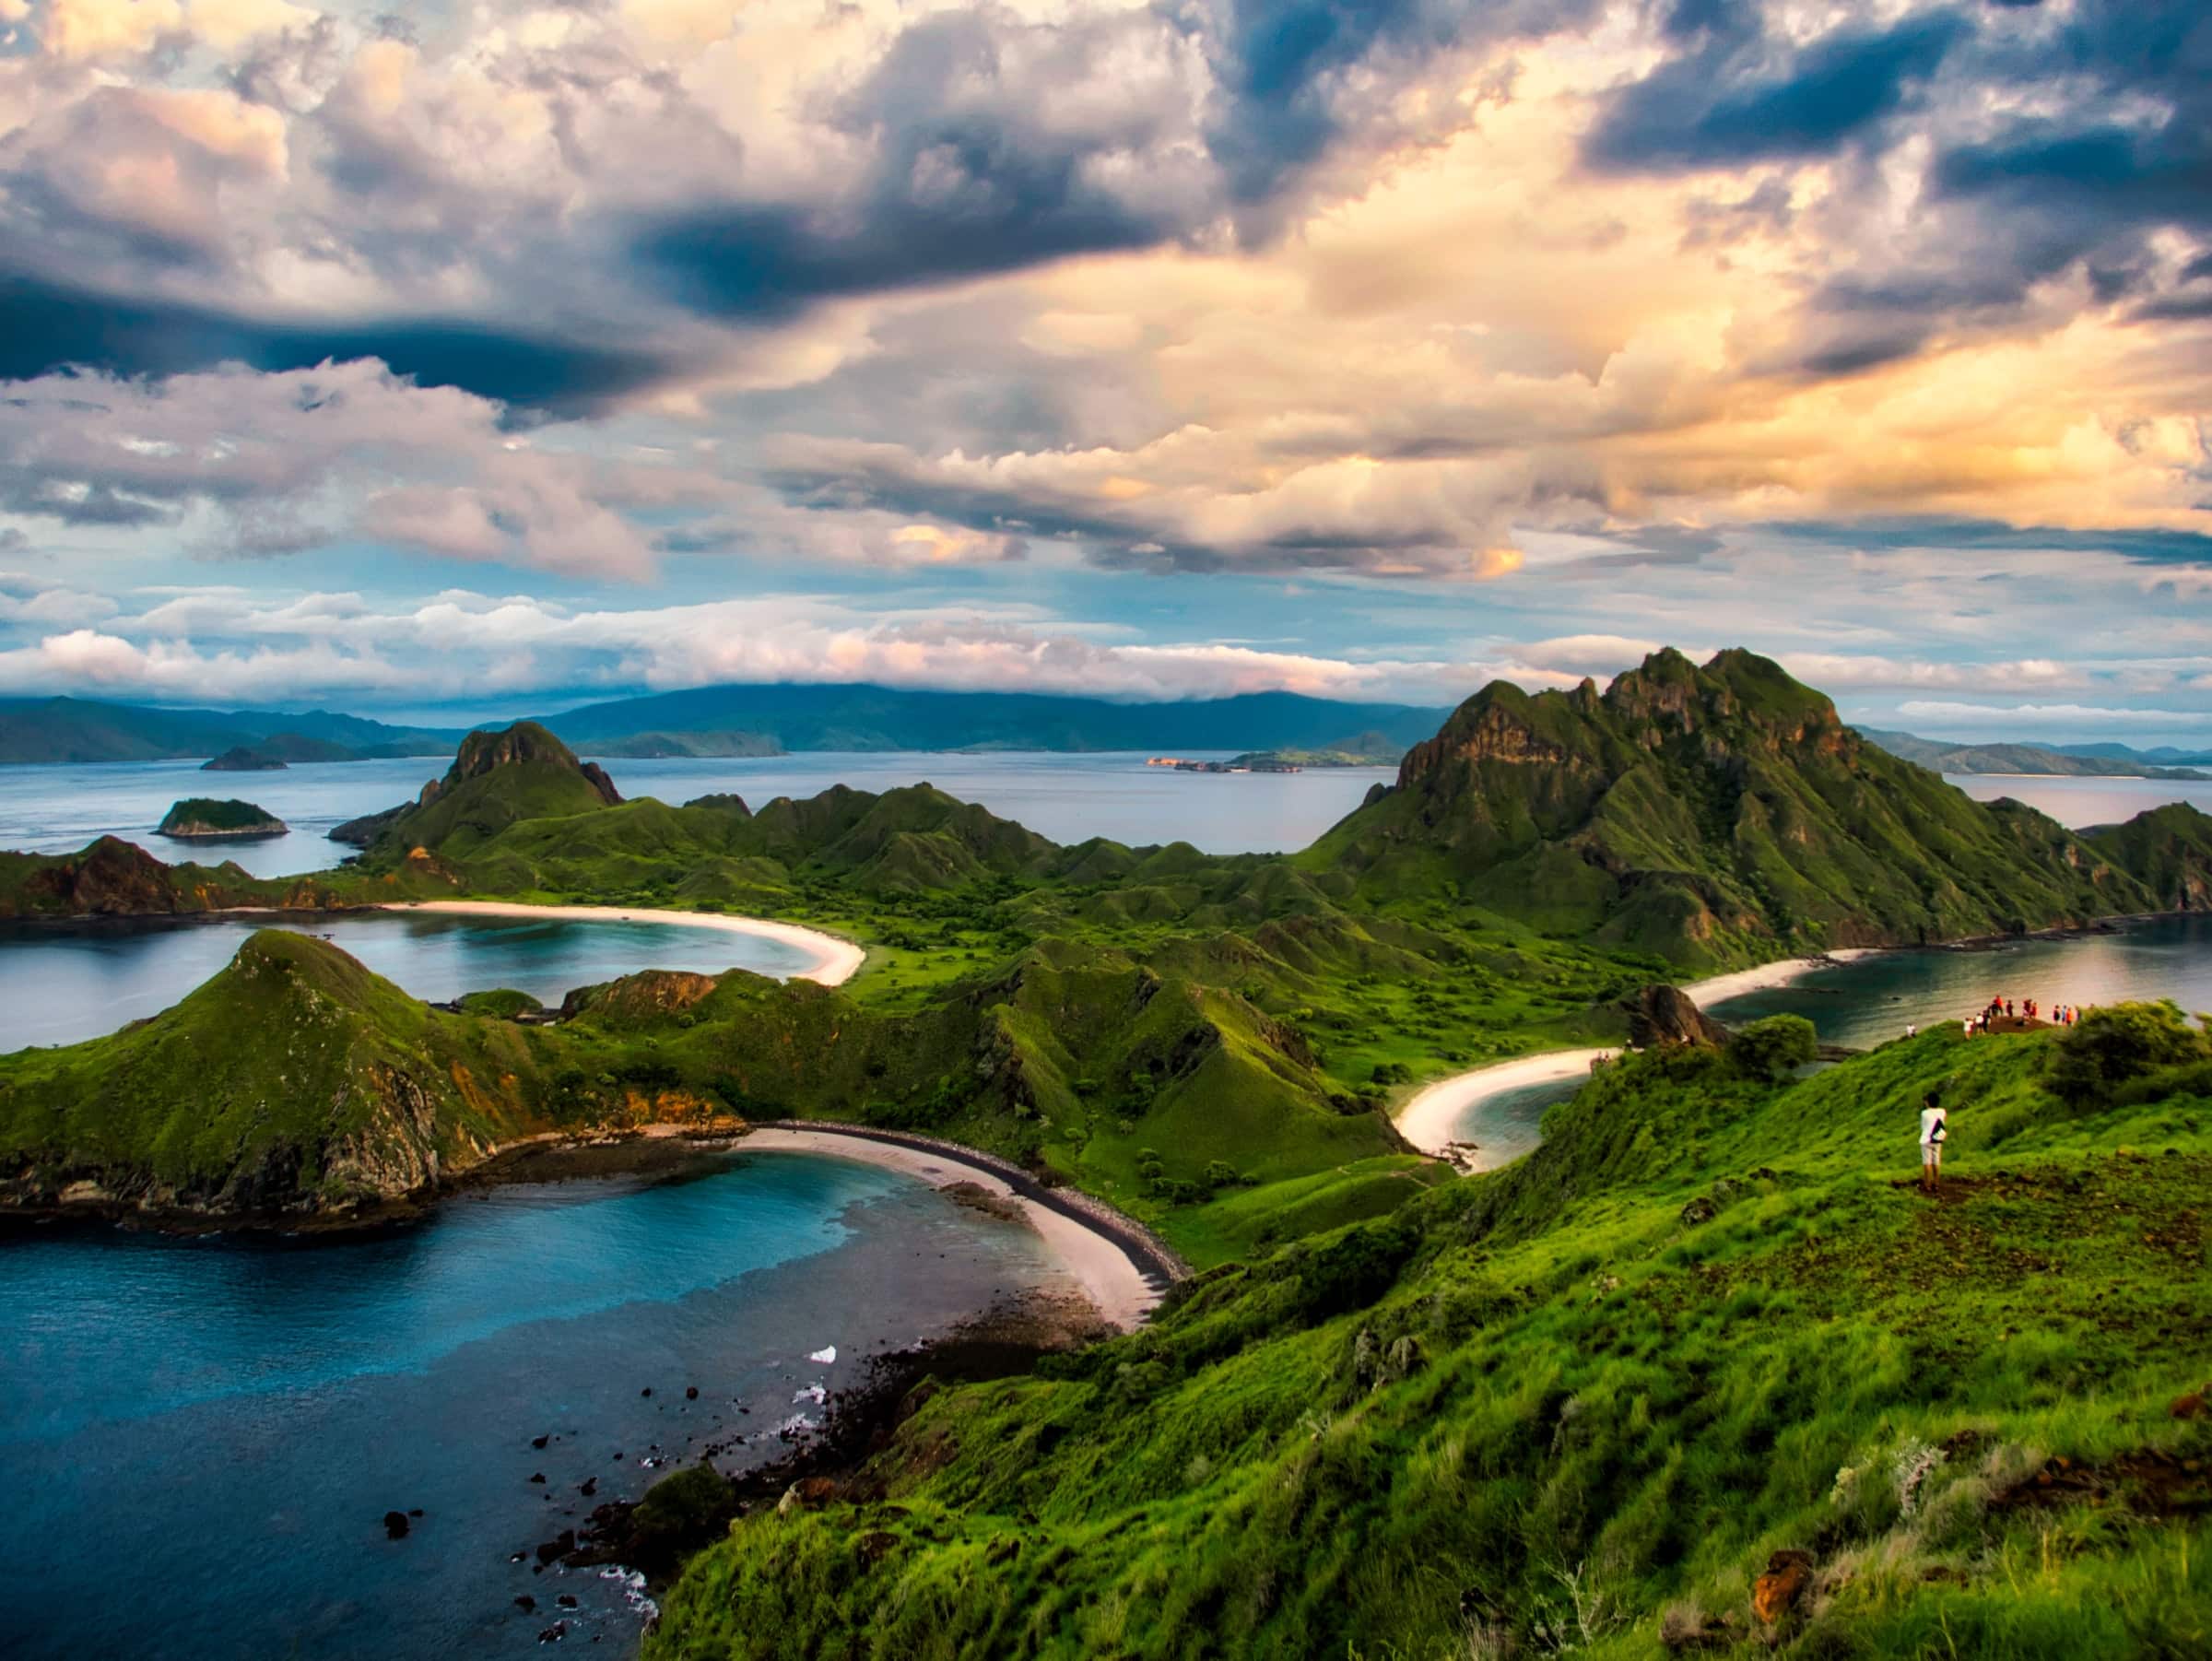 Komodo | The 7 natural wonders of the world